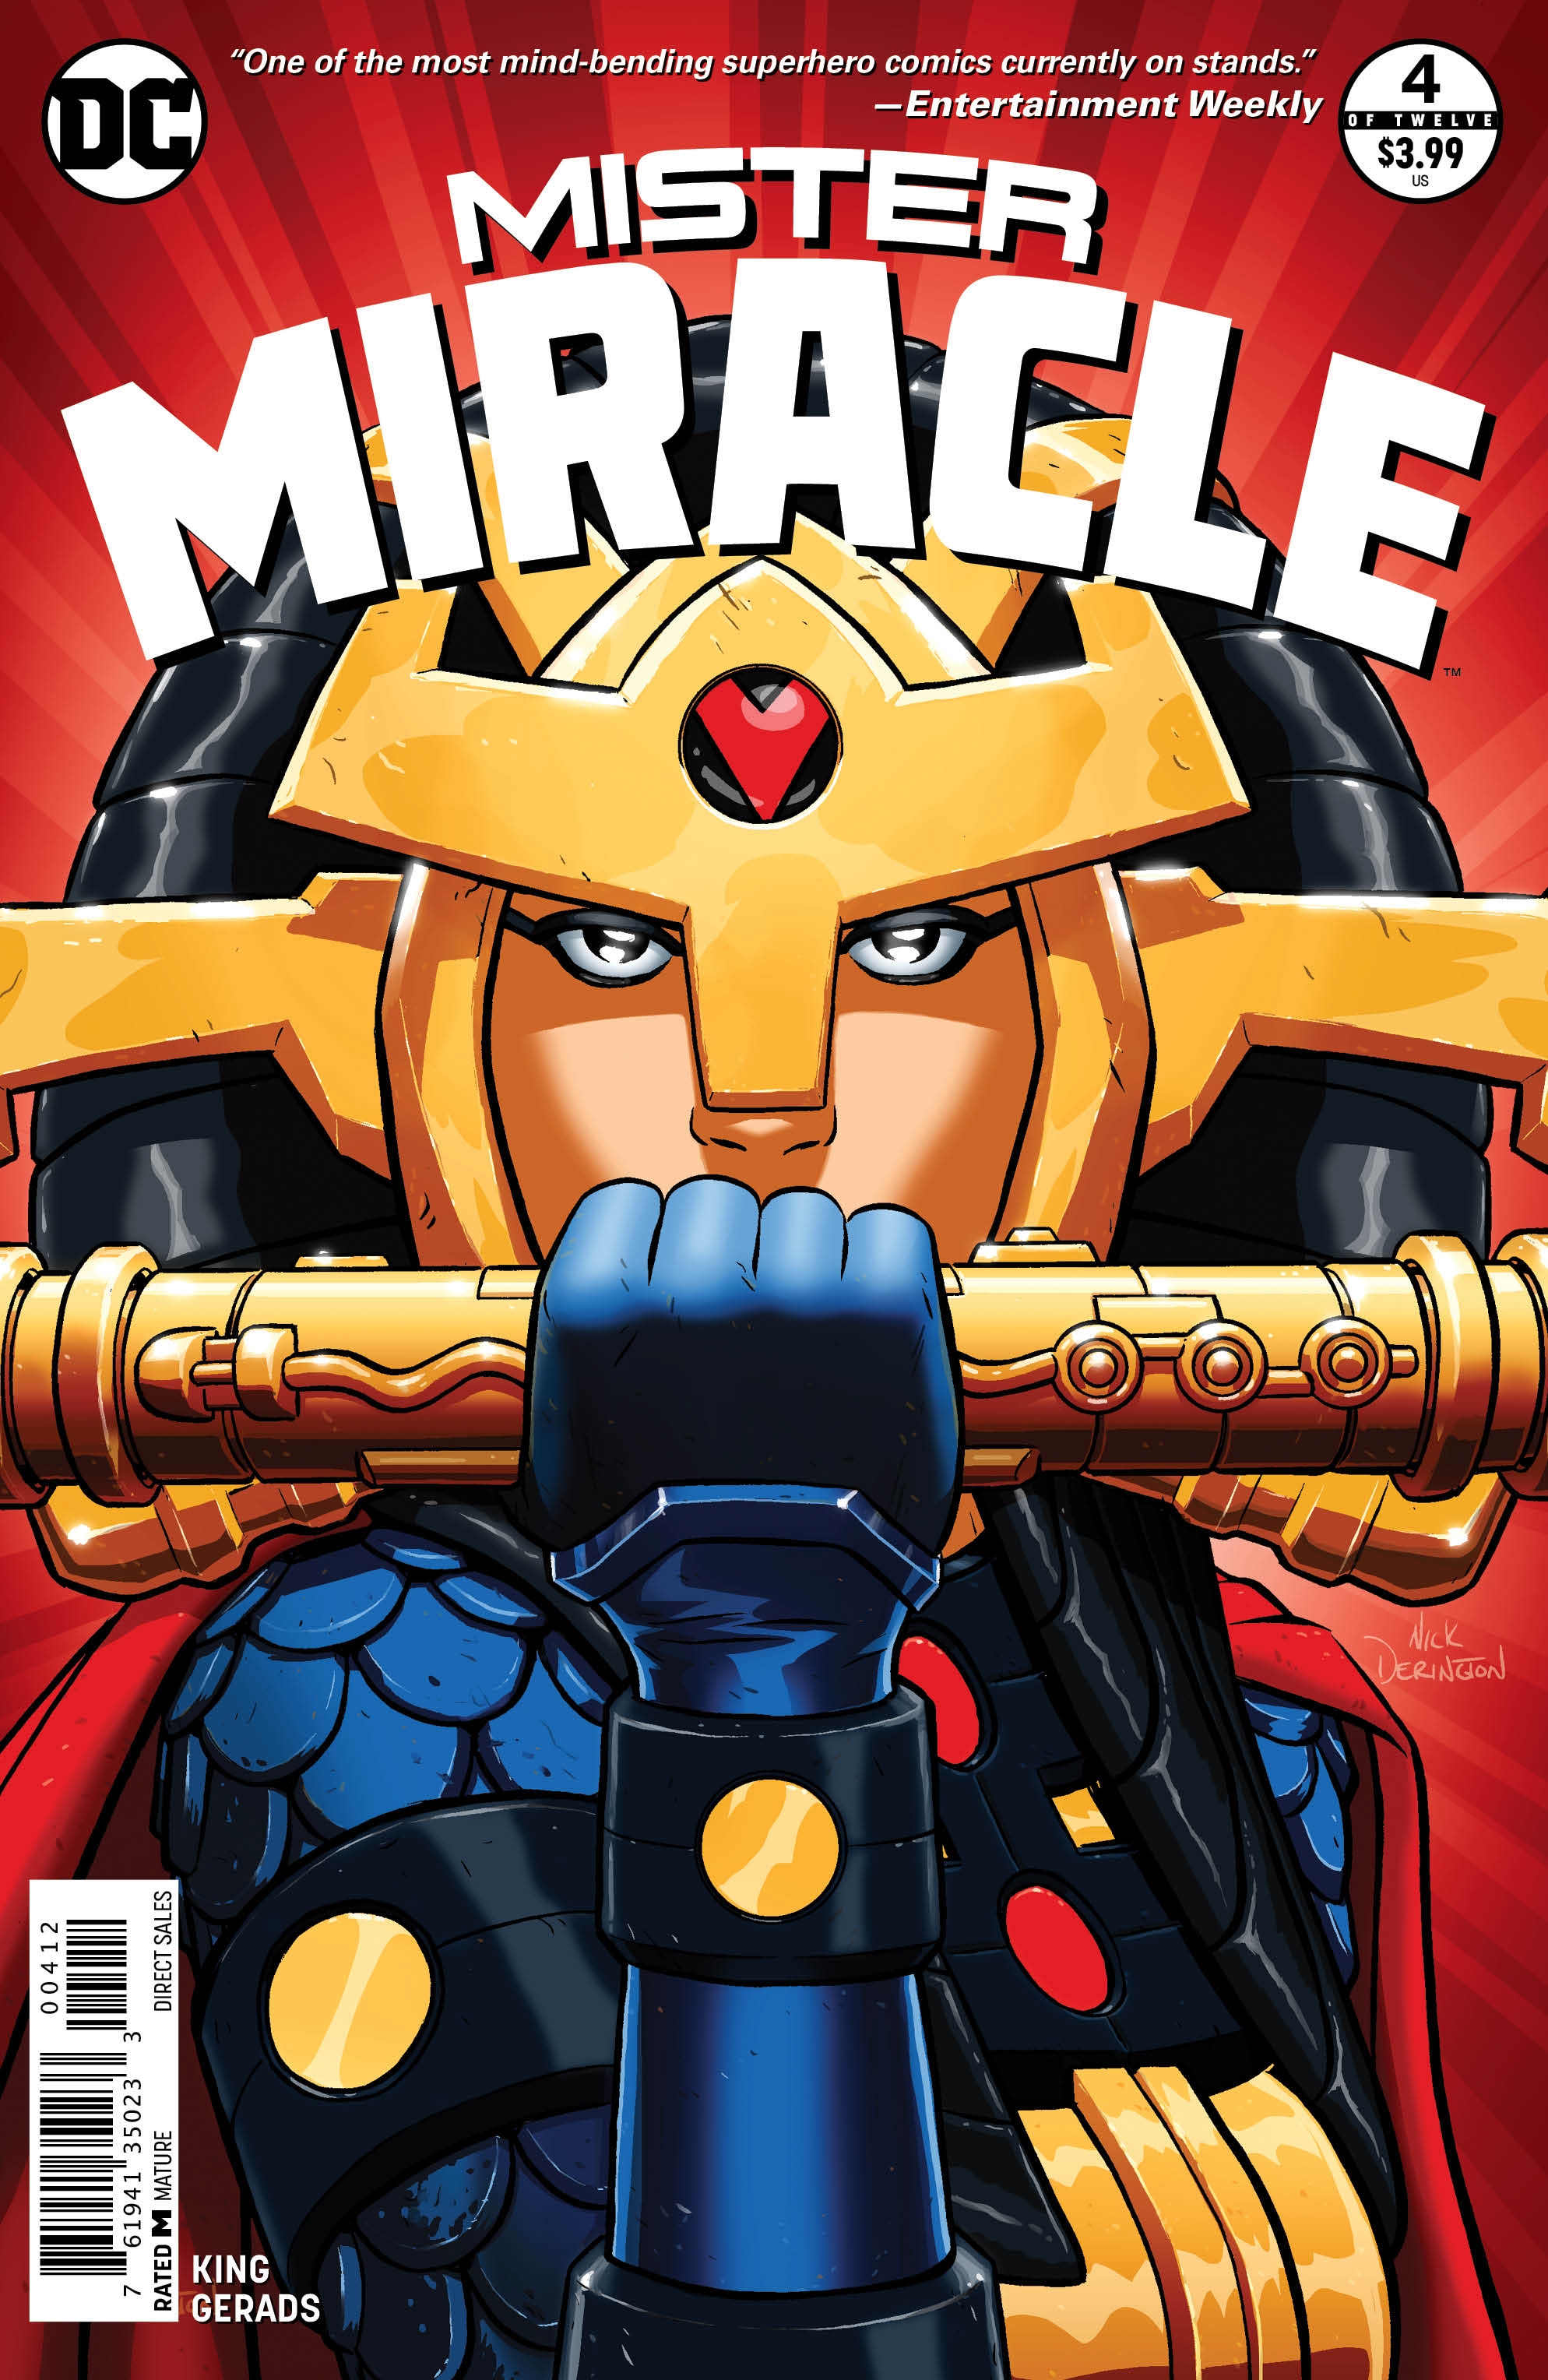 MISTER MIRACLE #4 (OF 12) 2ND PTG (MR)